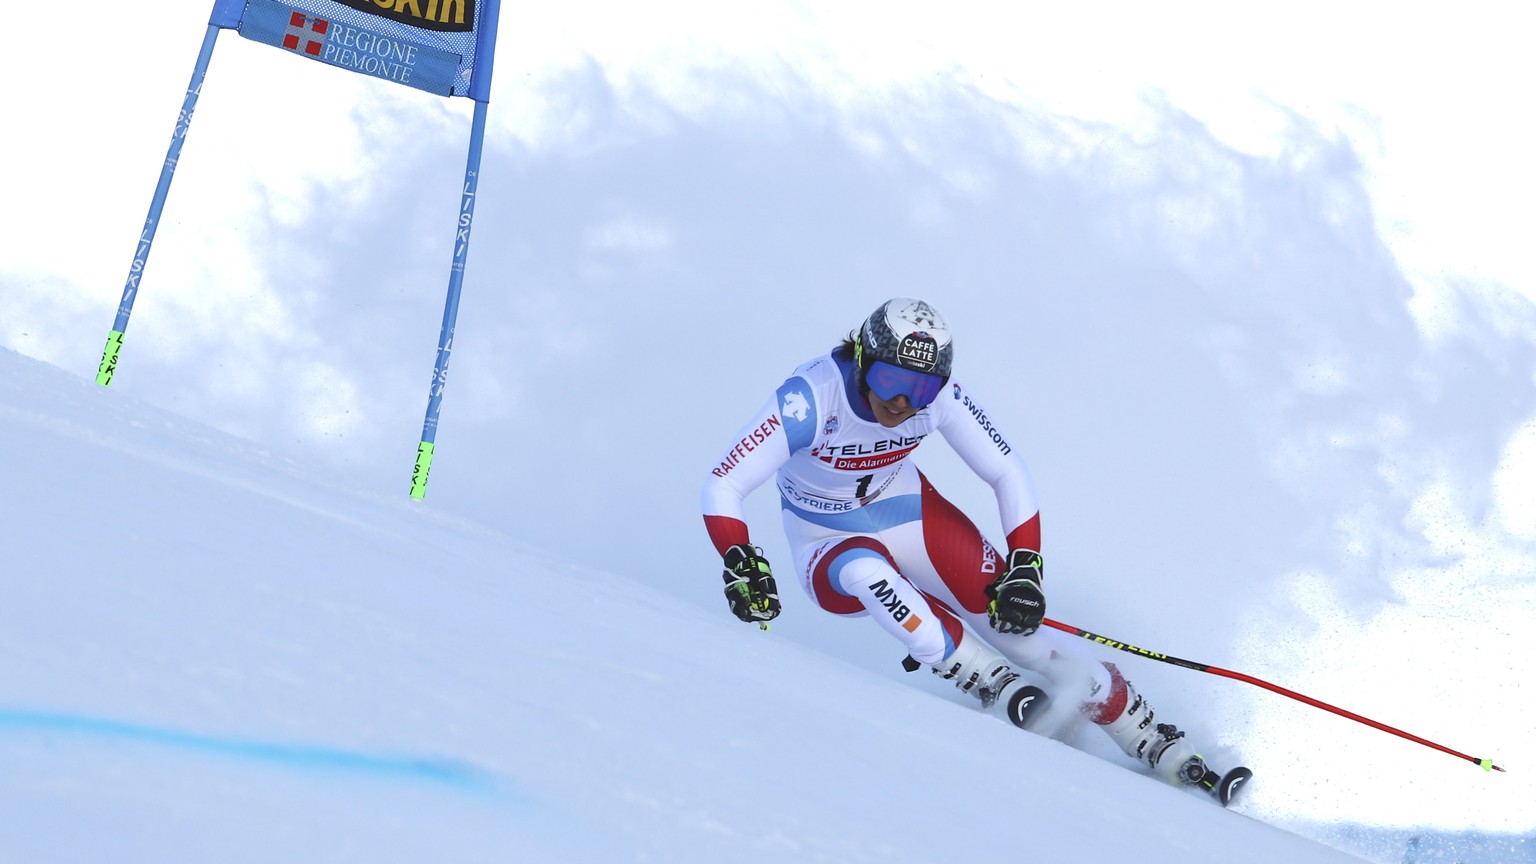 Switzerland&#039;s Wendy Holdener competes during the first run of an alpine ski, World Cup women&#039;s giant slalom in Sestriere, Italy, Saturday, Jan. 18, 2020. (AP Photo/Marco Trovati)